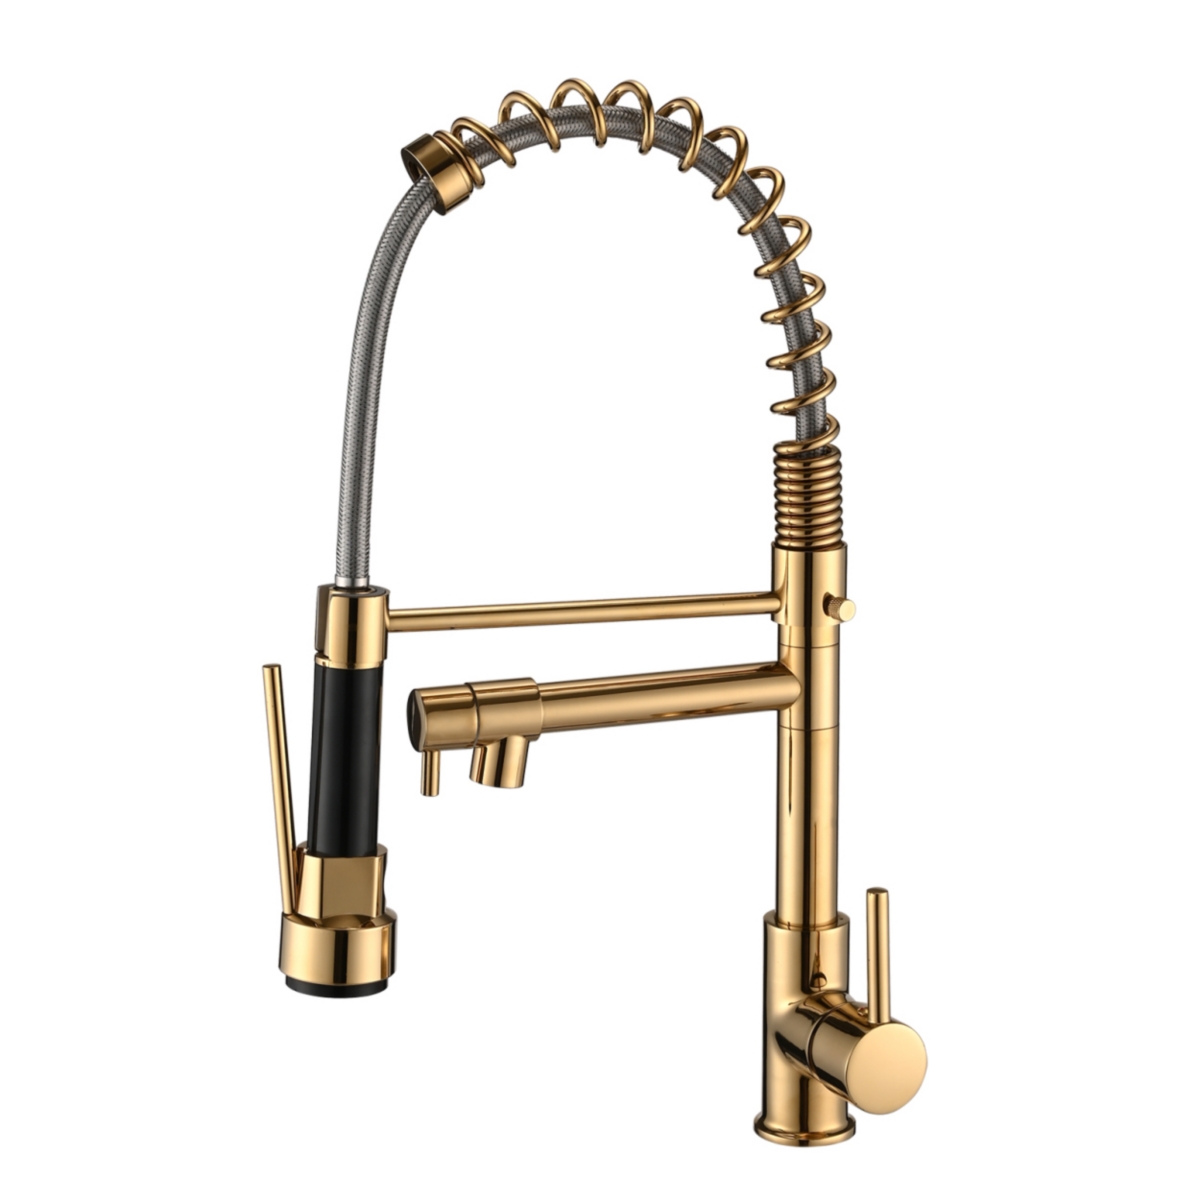 Commercial Pull Down Kitchen Sink Faucet Single Handle Modern Kitchen Faucets - Gold